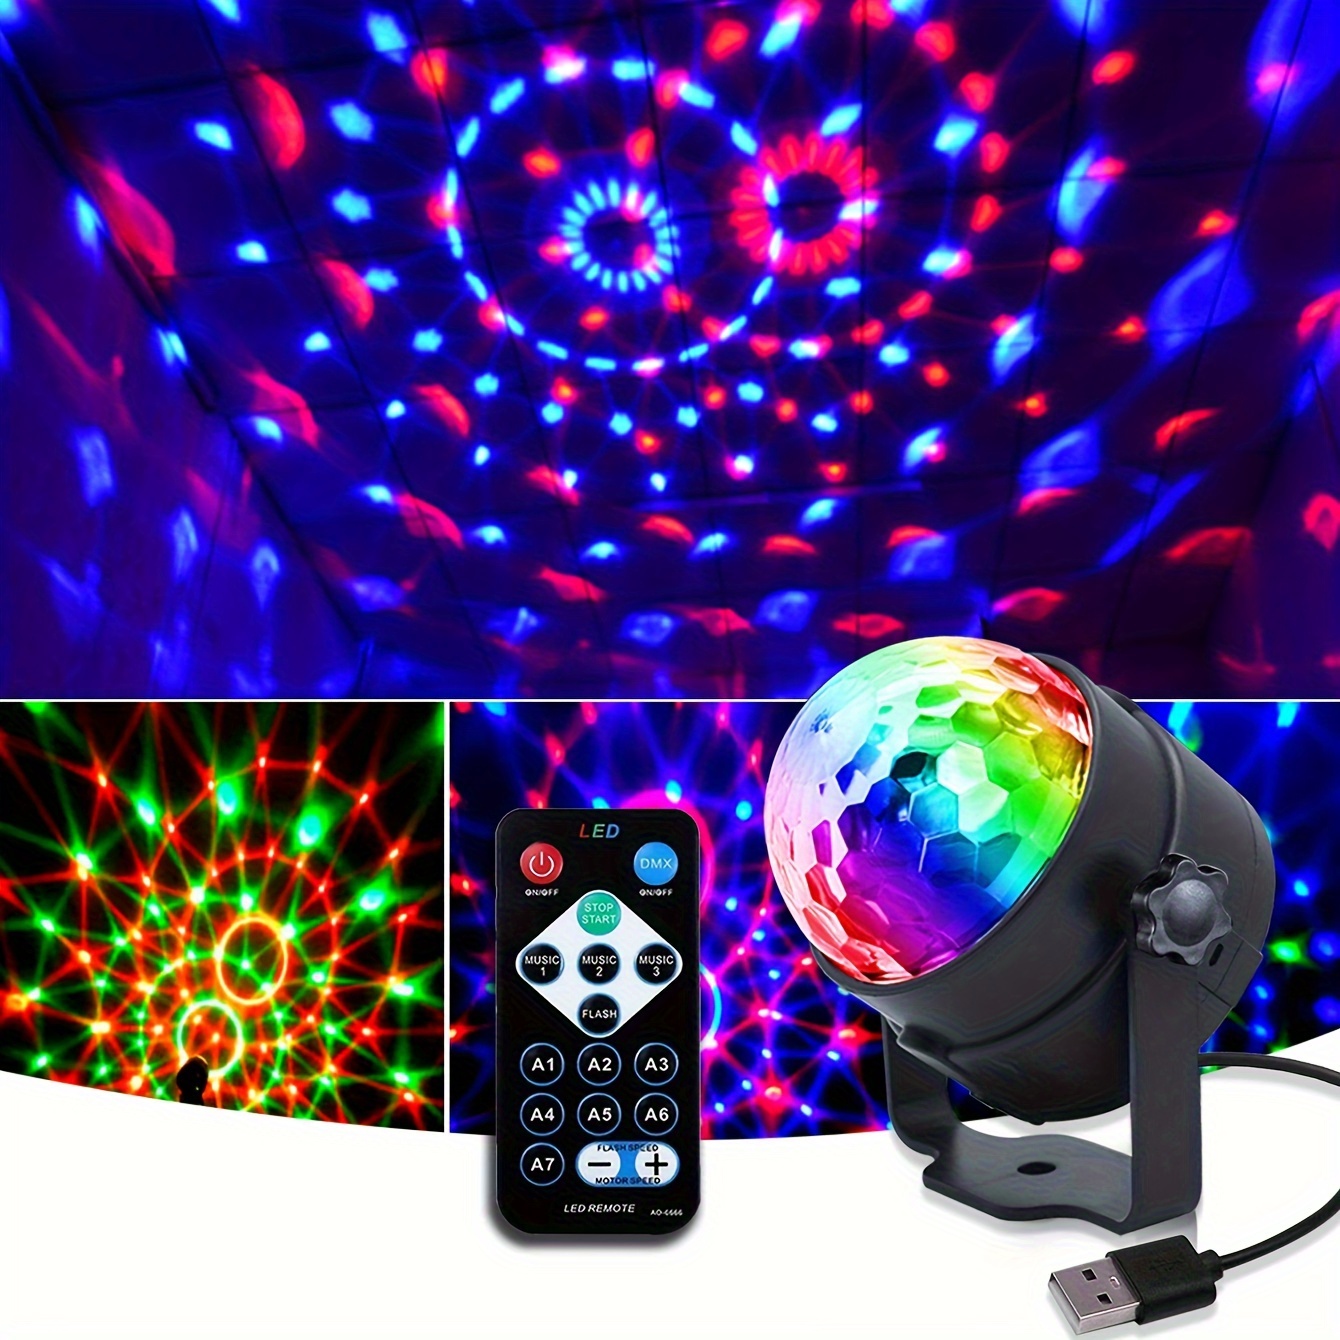 

1pc Abs Crystal Remote Control Magic Ball Light, 7 Color Stage Light With Remote Control Bracket, Flash, Remote Control Color Change, Cool Stage Light, Projection Light